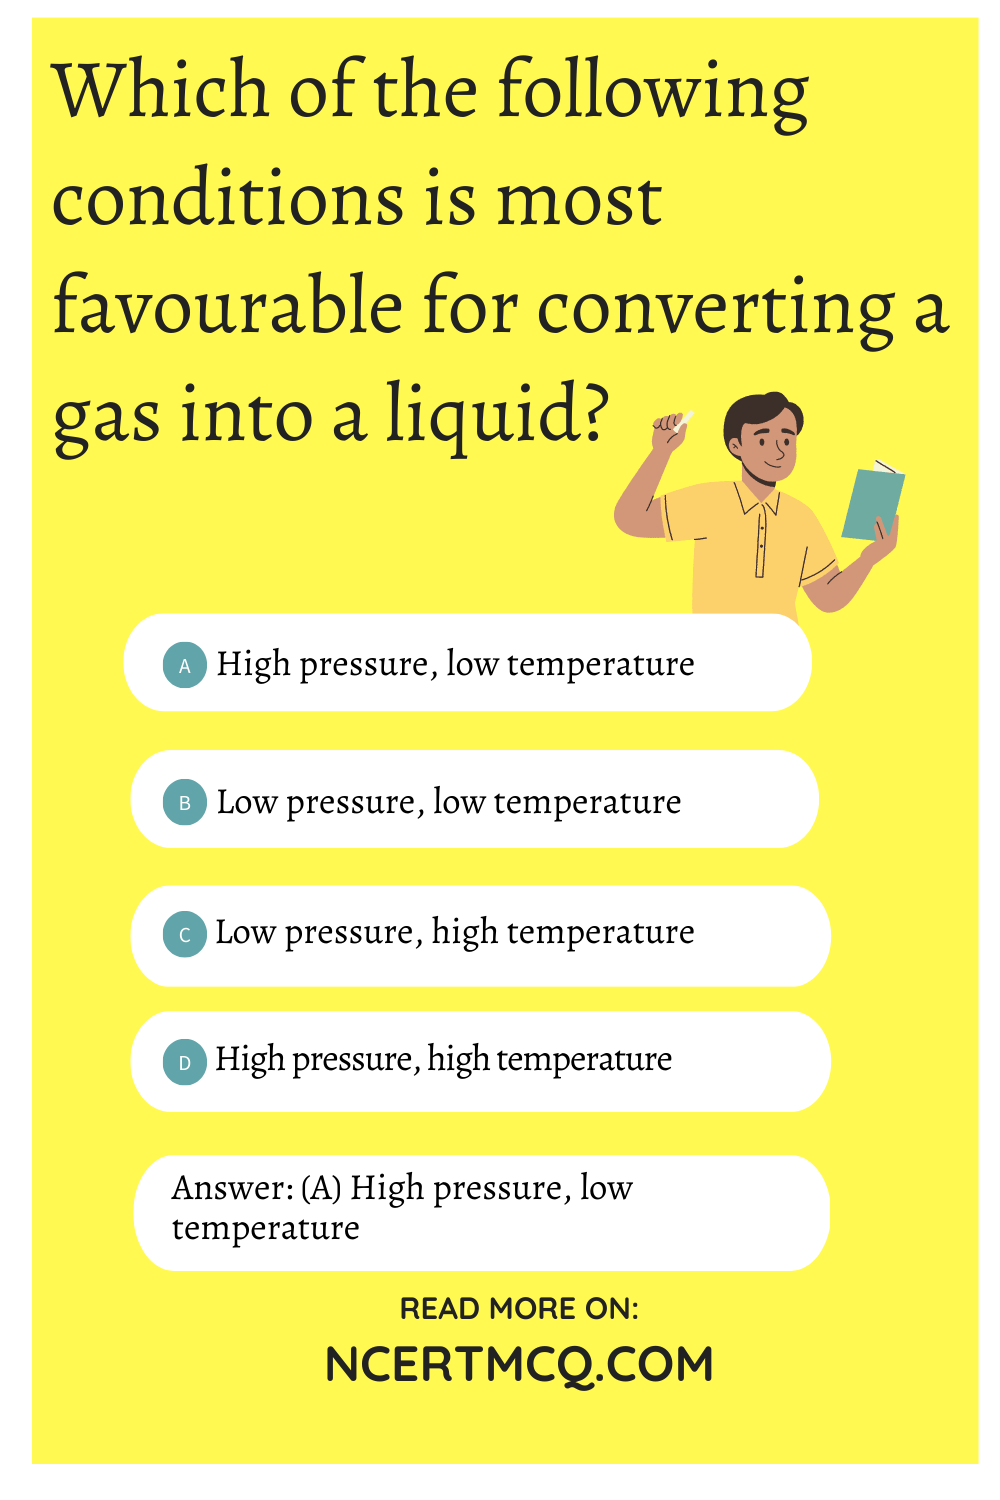 Which of the following conditions is most favourable for converting a gas into a liquid?